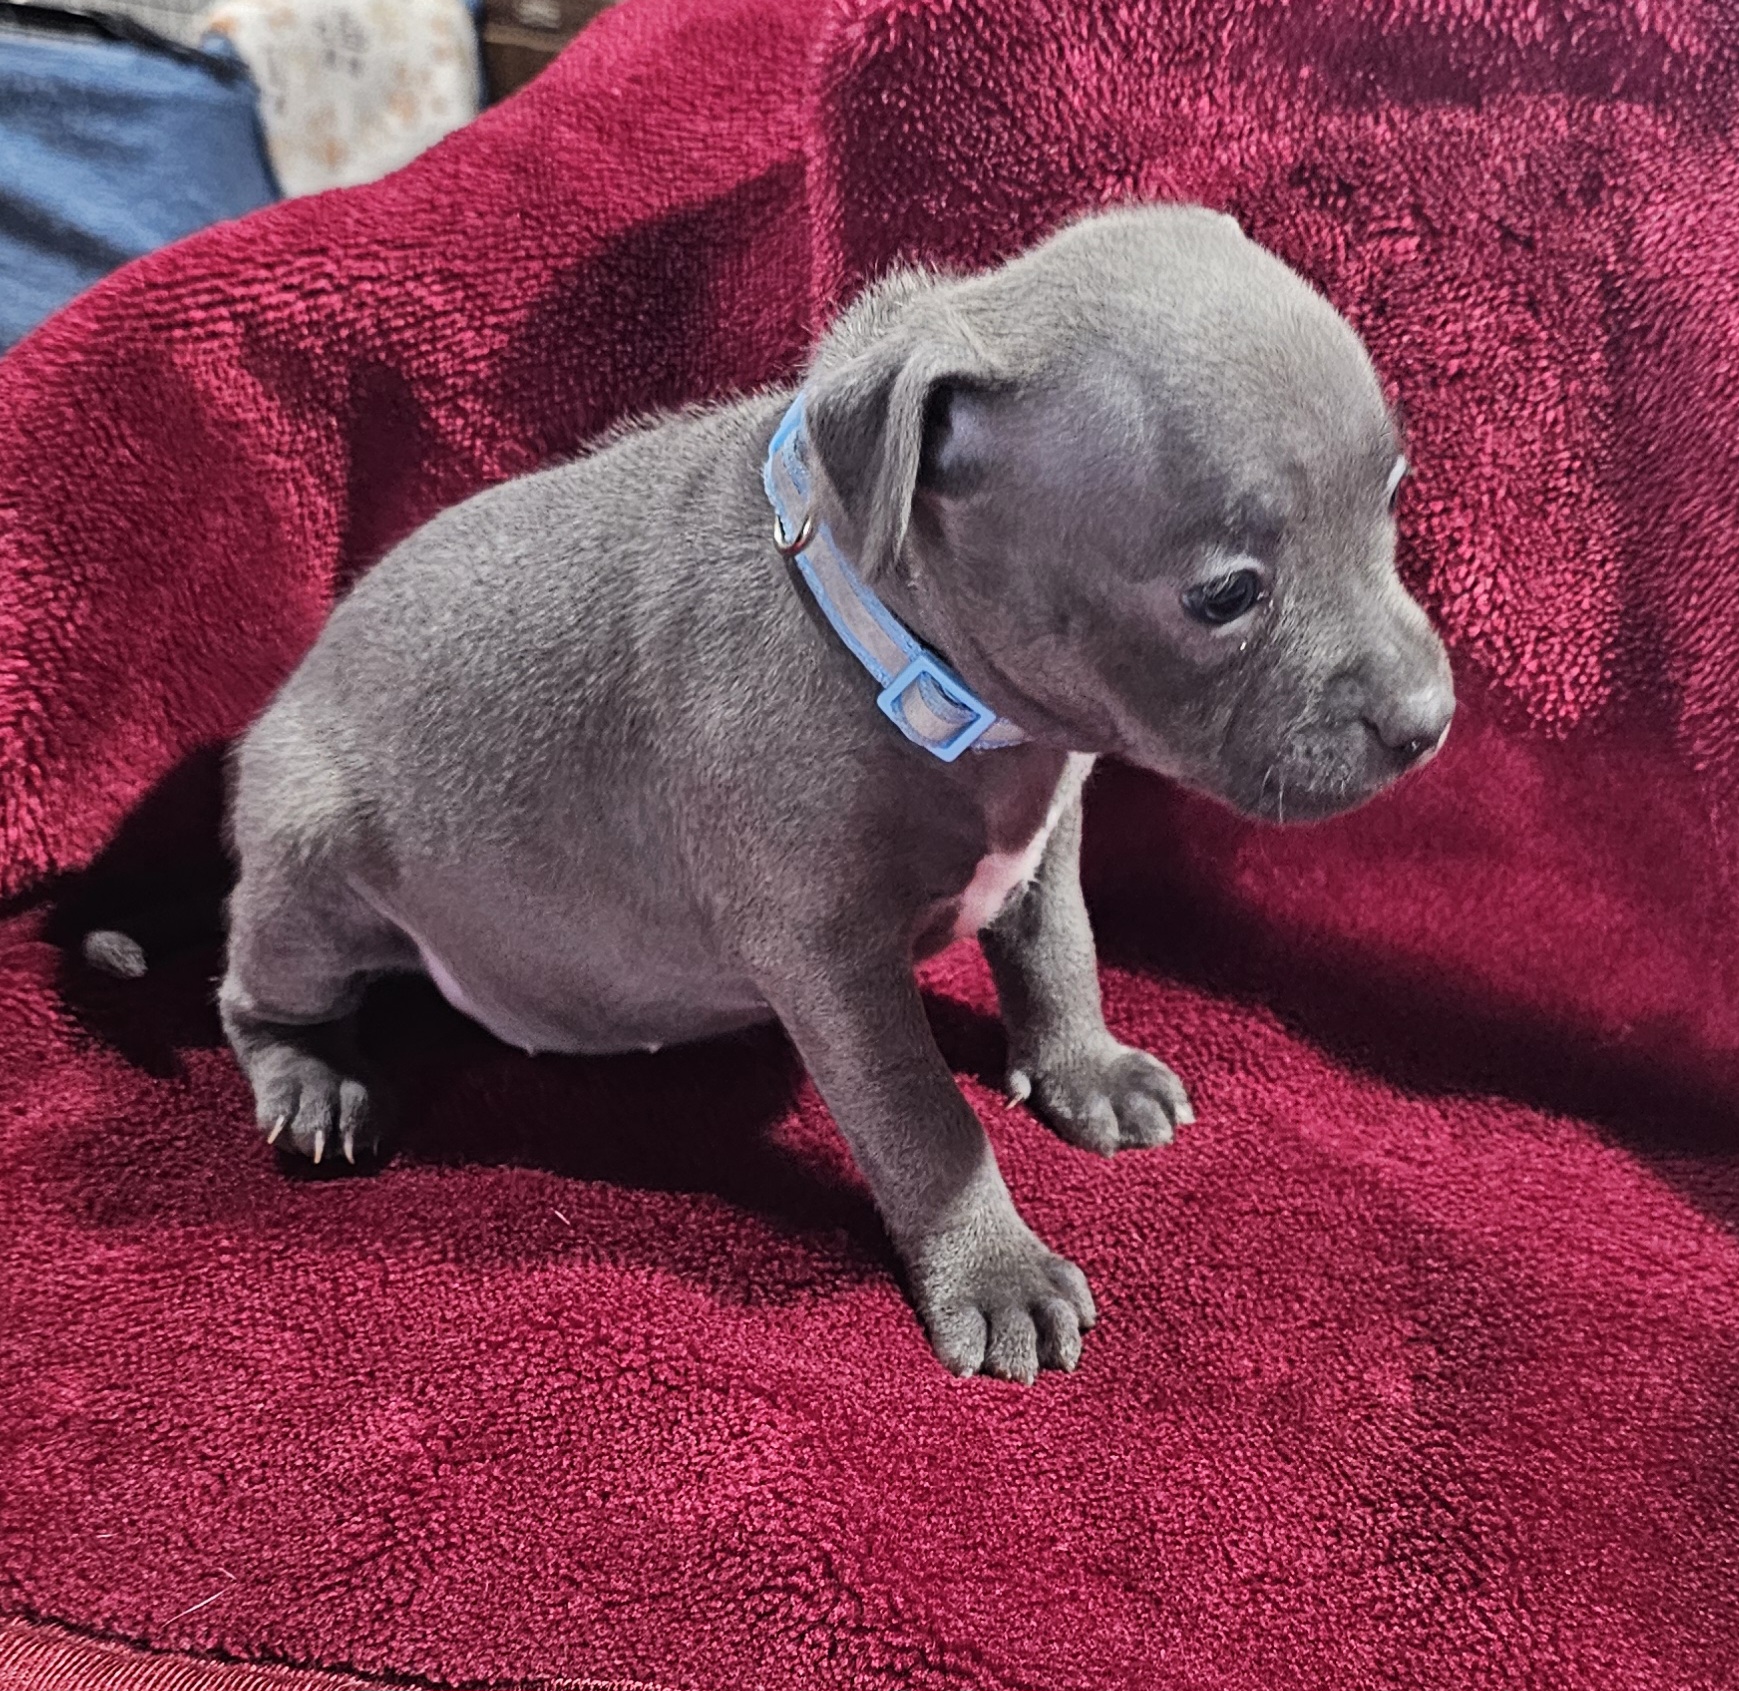 Blue Staffordshire Bull Terrier with White features